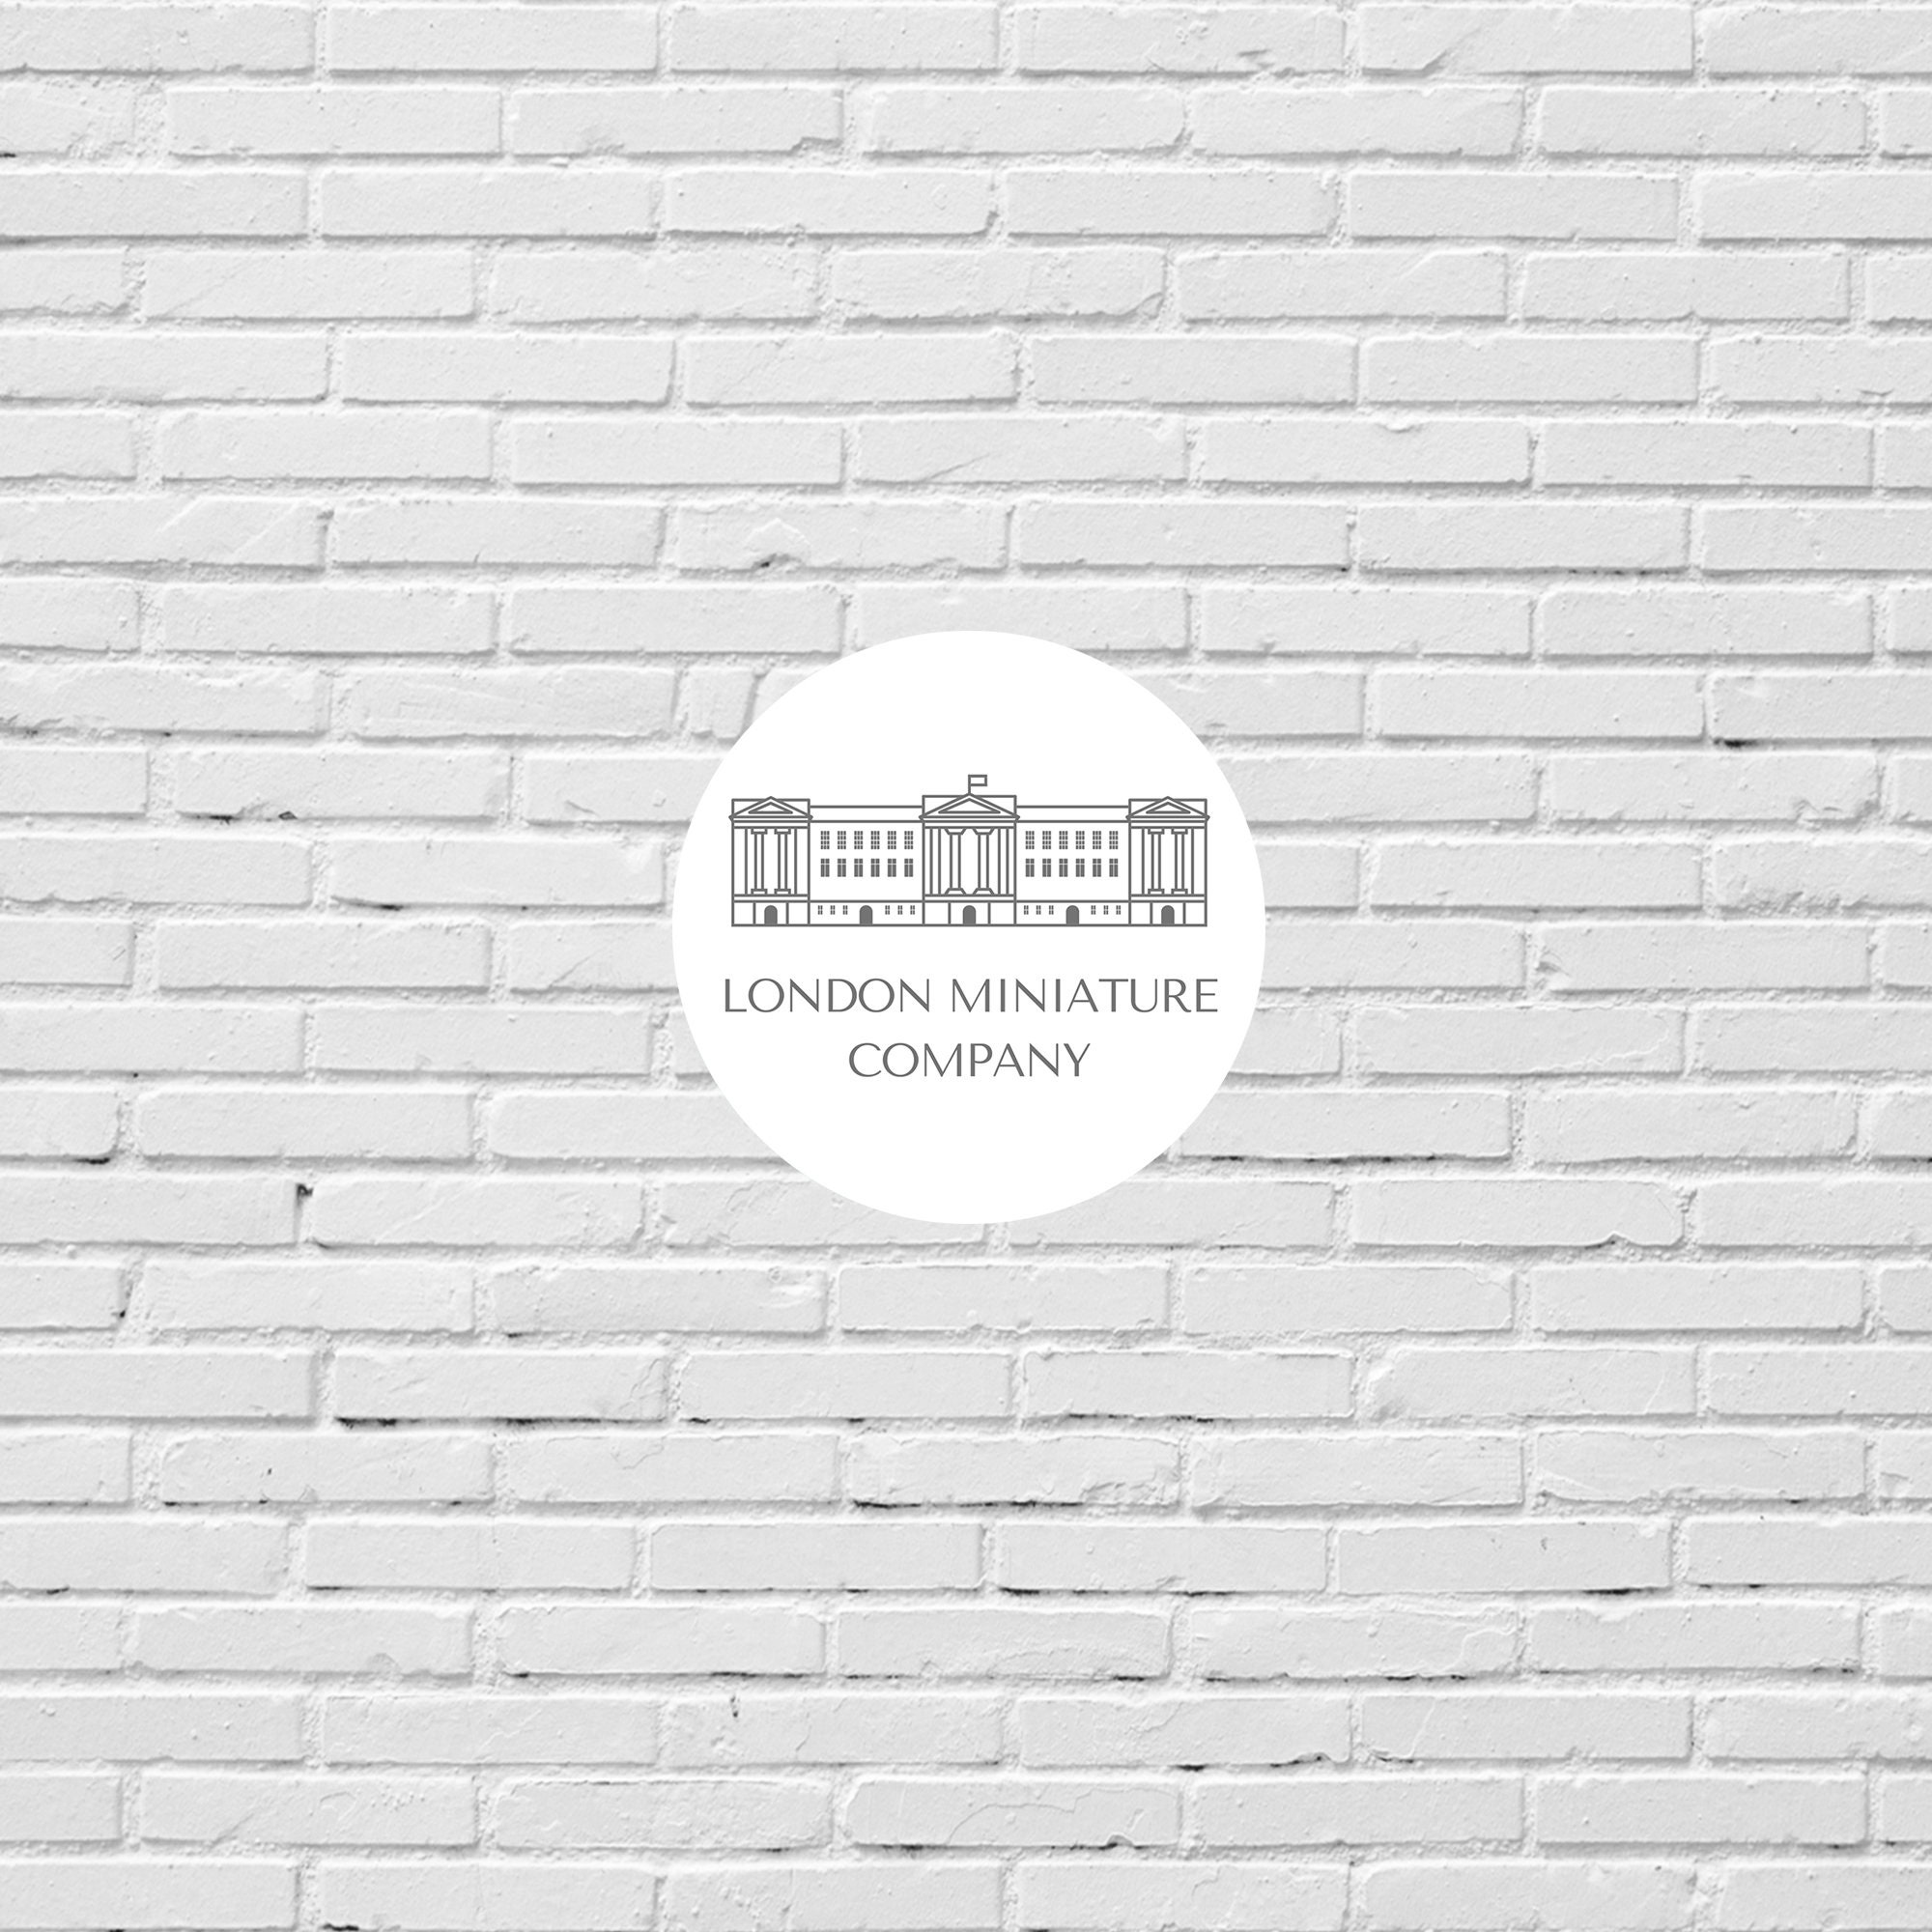 Painted Brick off White Wallpaper -  Finland